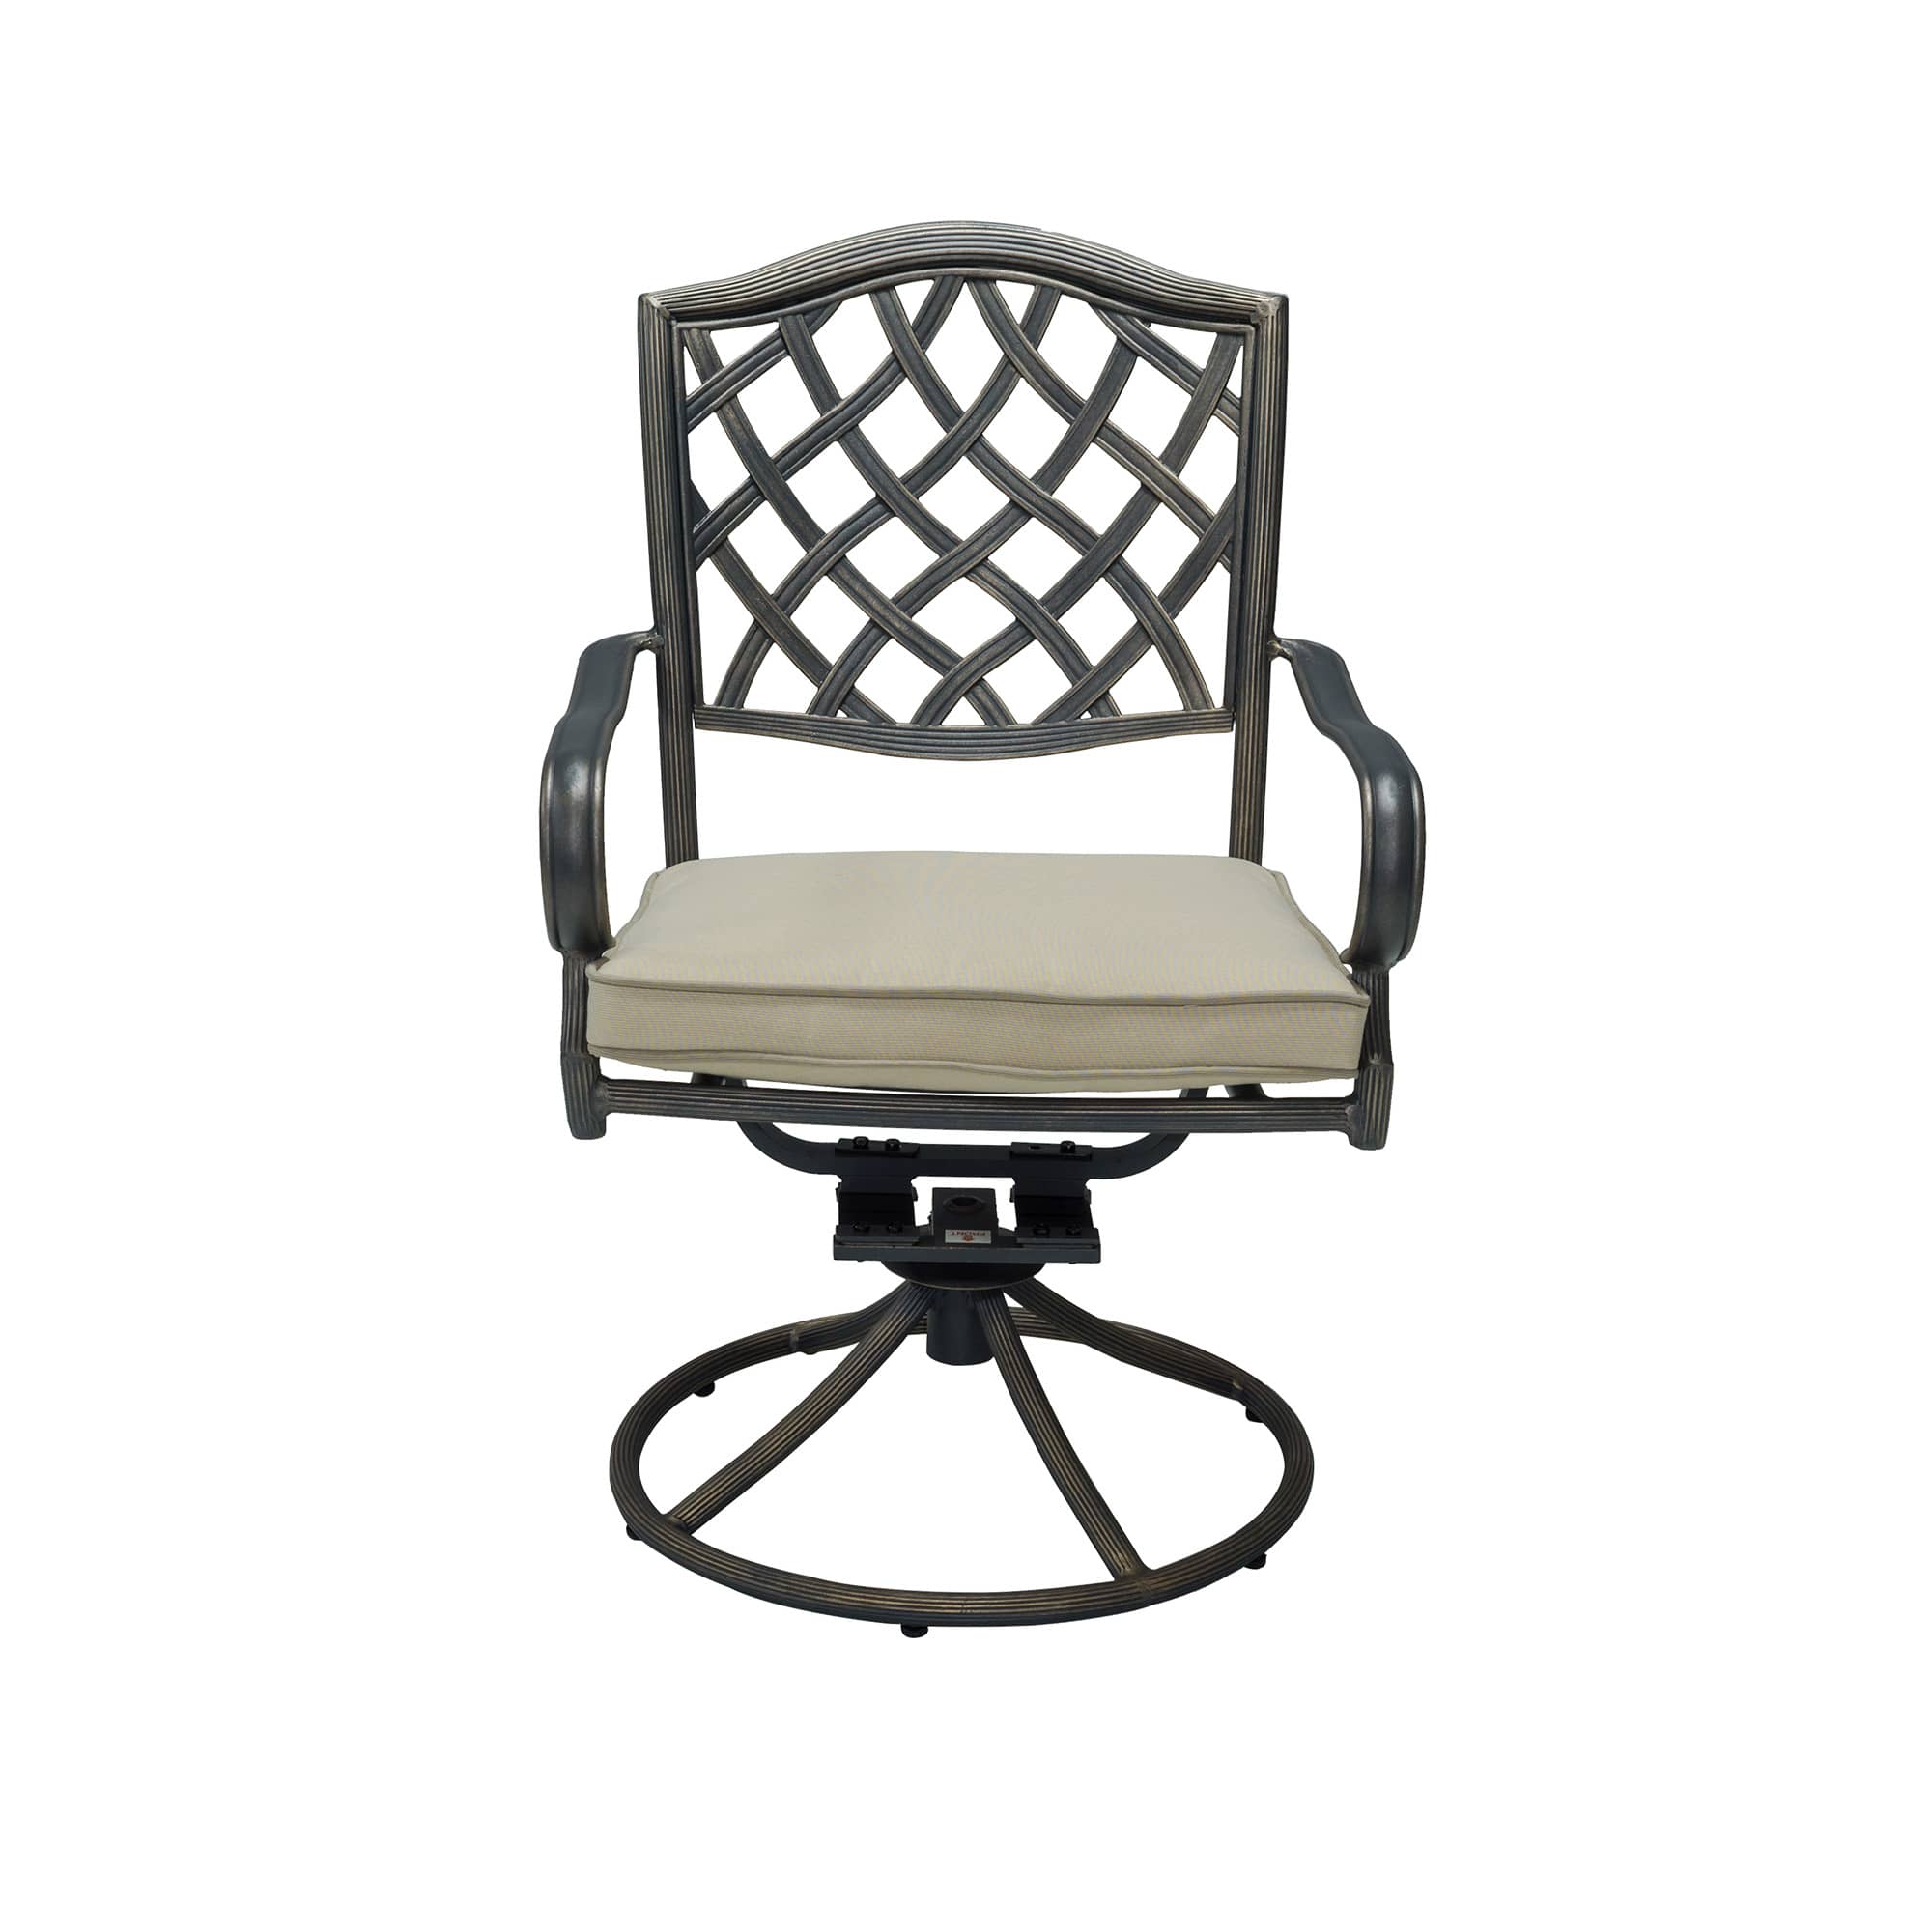 CASAINC 2-Piece Brown Cast Aluminum Outdoor Swivel Dining Chair Patio Bistro Chairs with Cushion